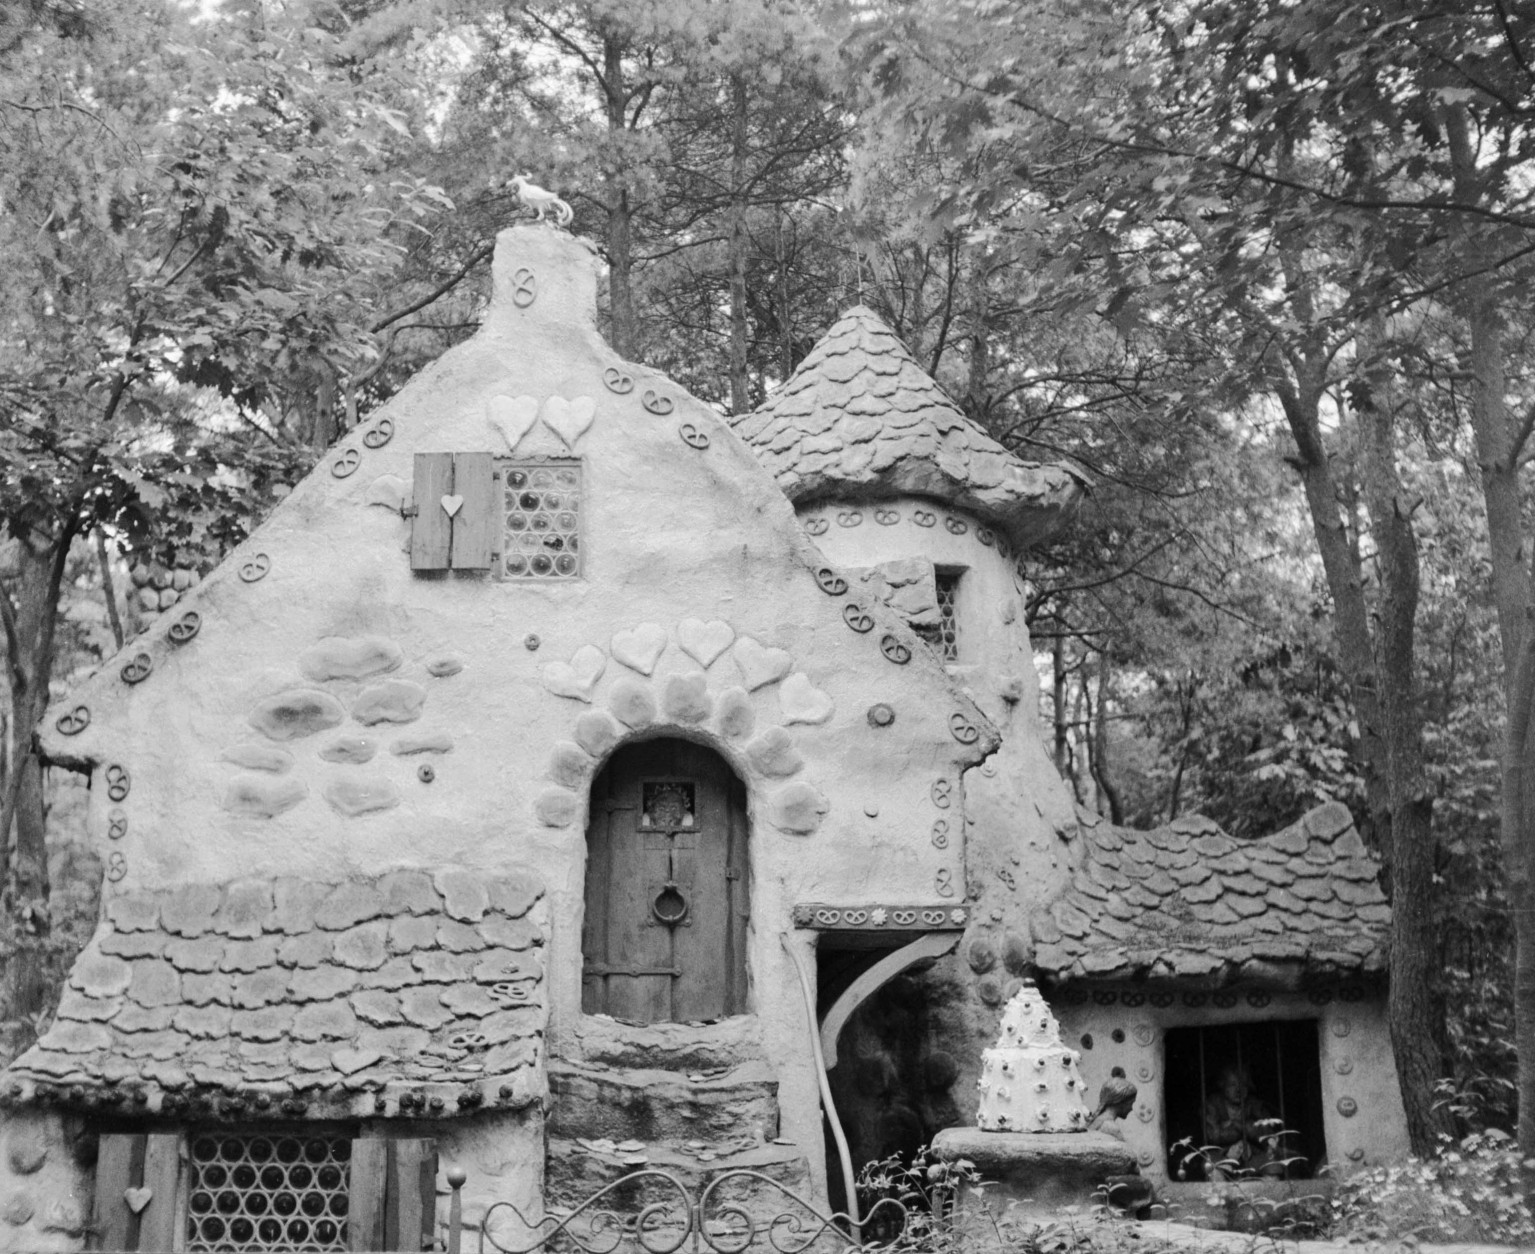 circa 1955:  The Gingerbread House where the old witch lives in the tale of Hansel and Gretel.  (Photo by Evans/Three Lions/Getty Images)